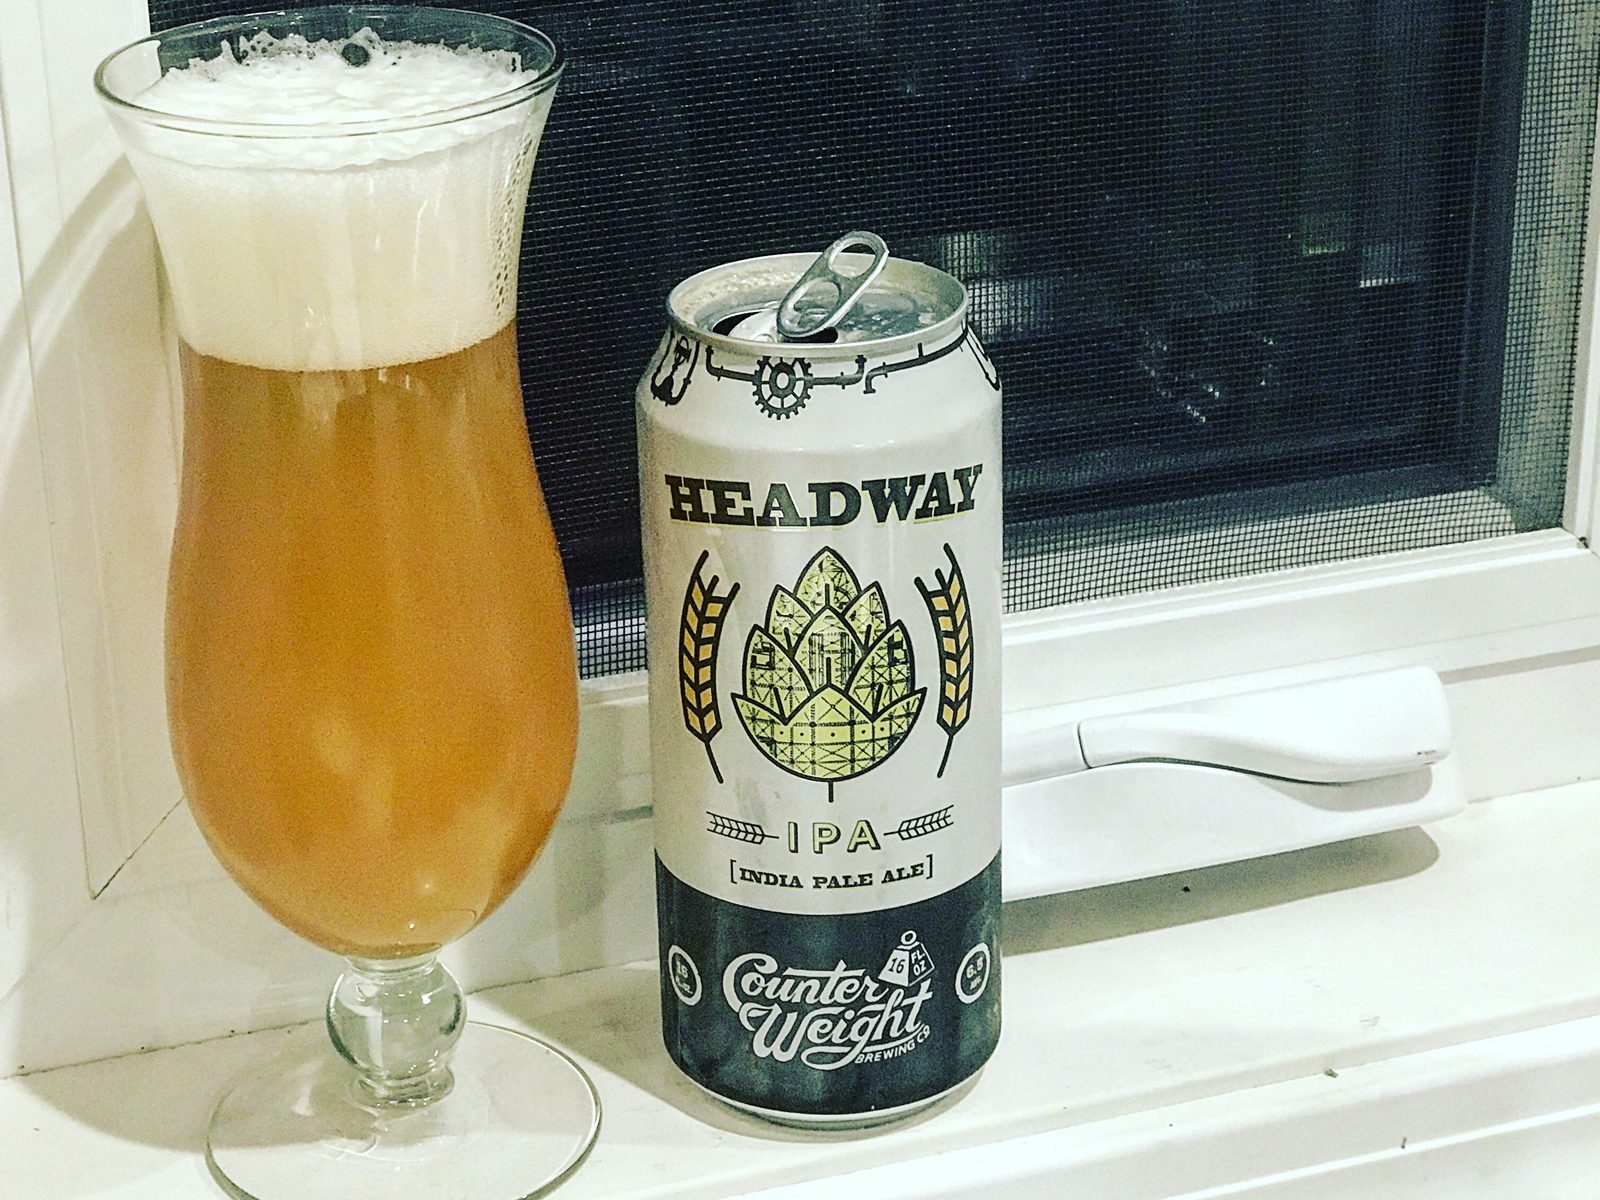 Counter Weight Brewing Company: Headway IPA